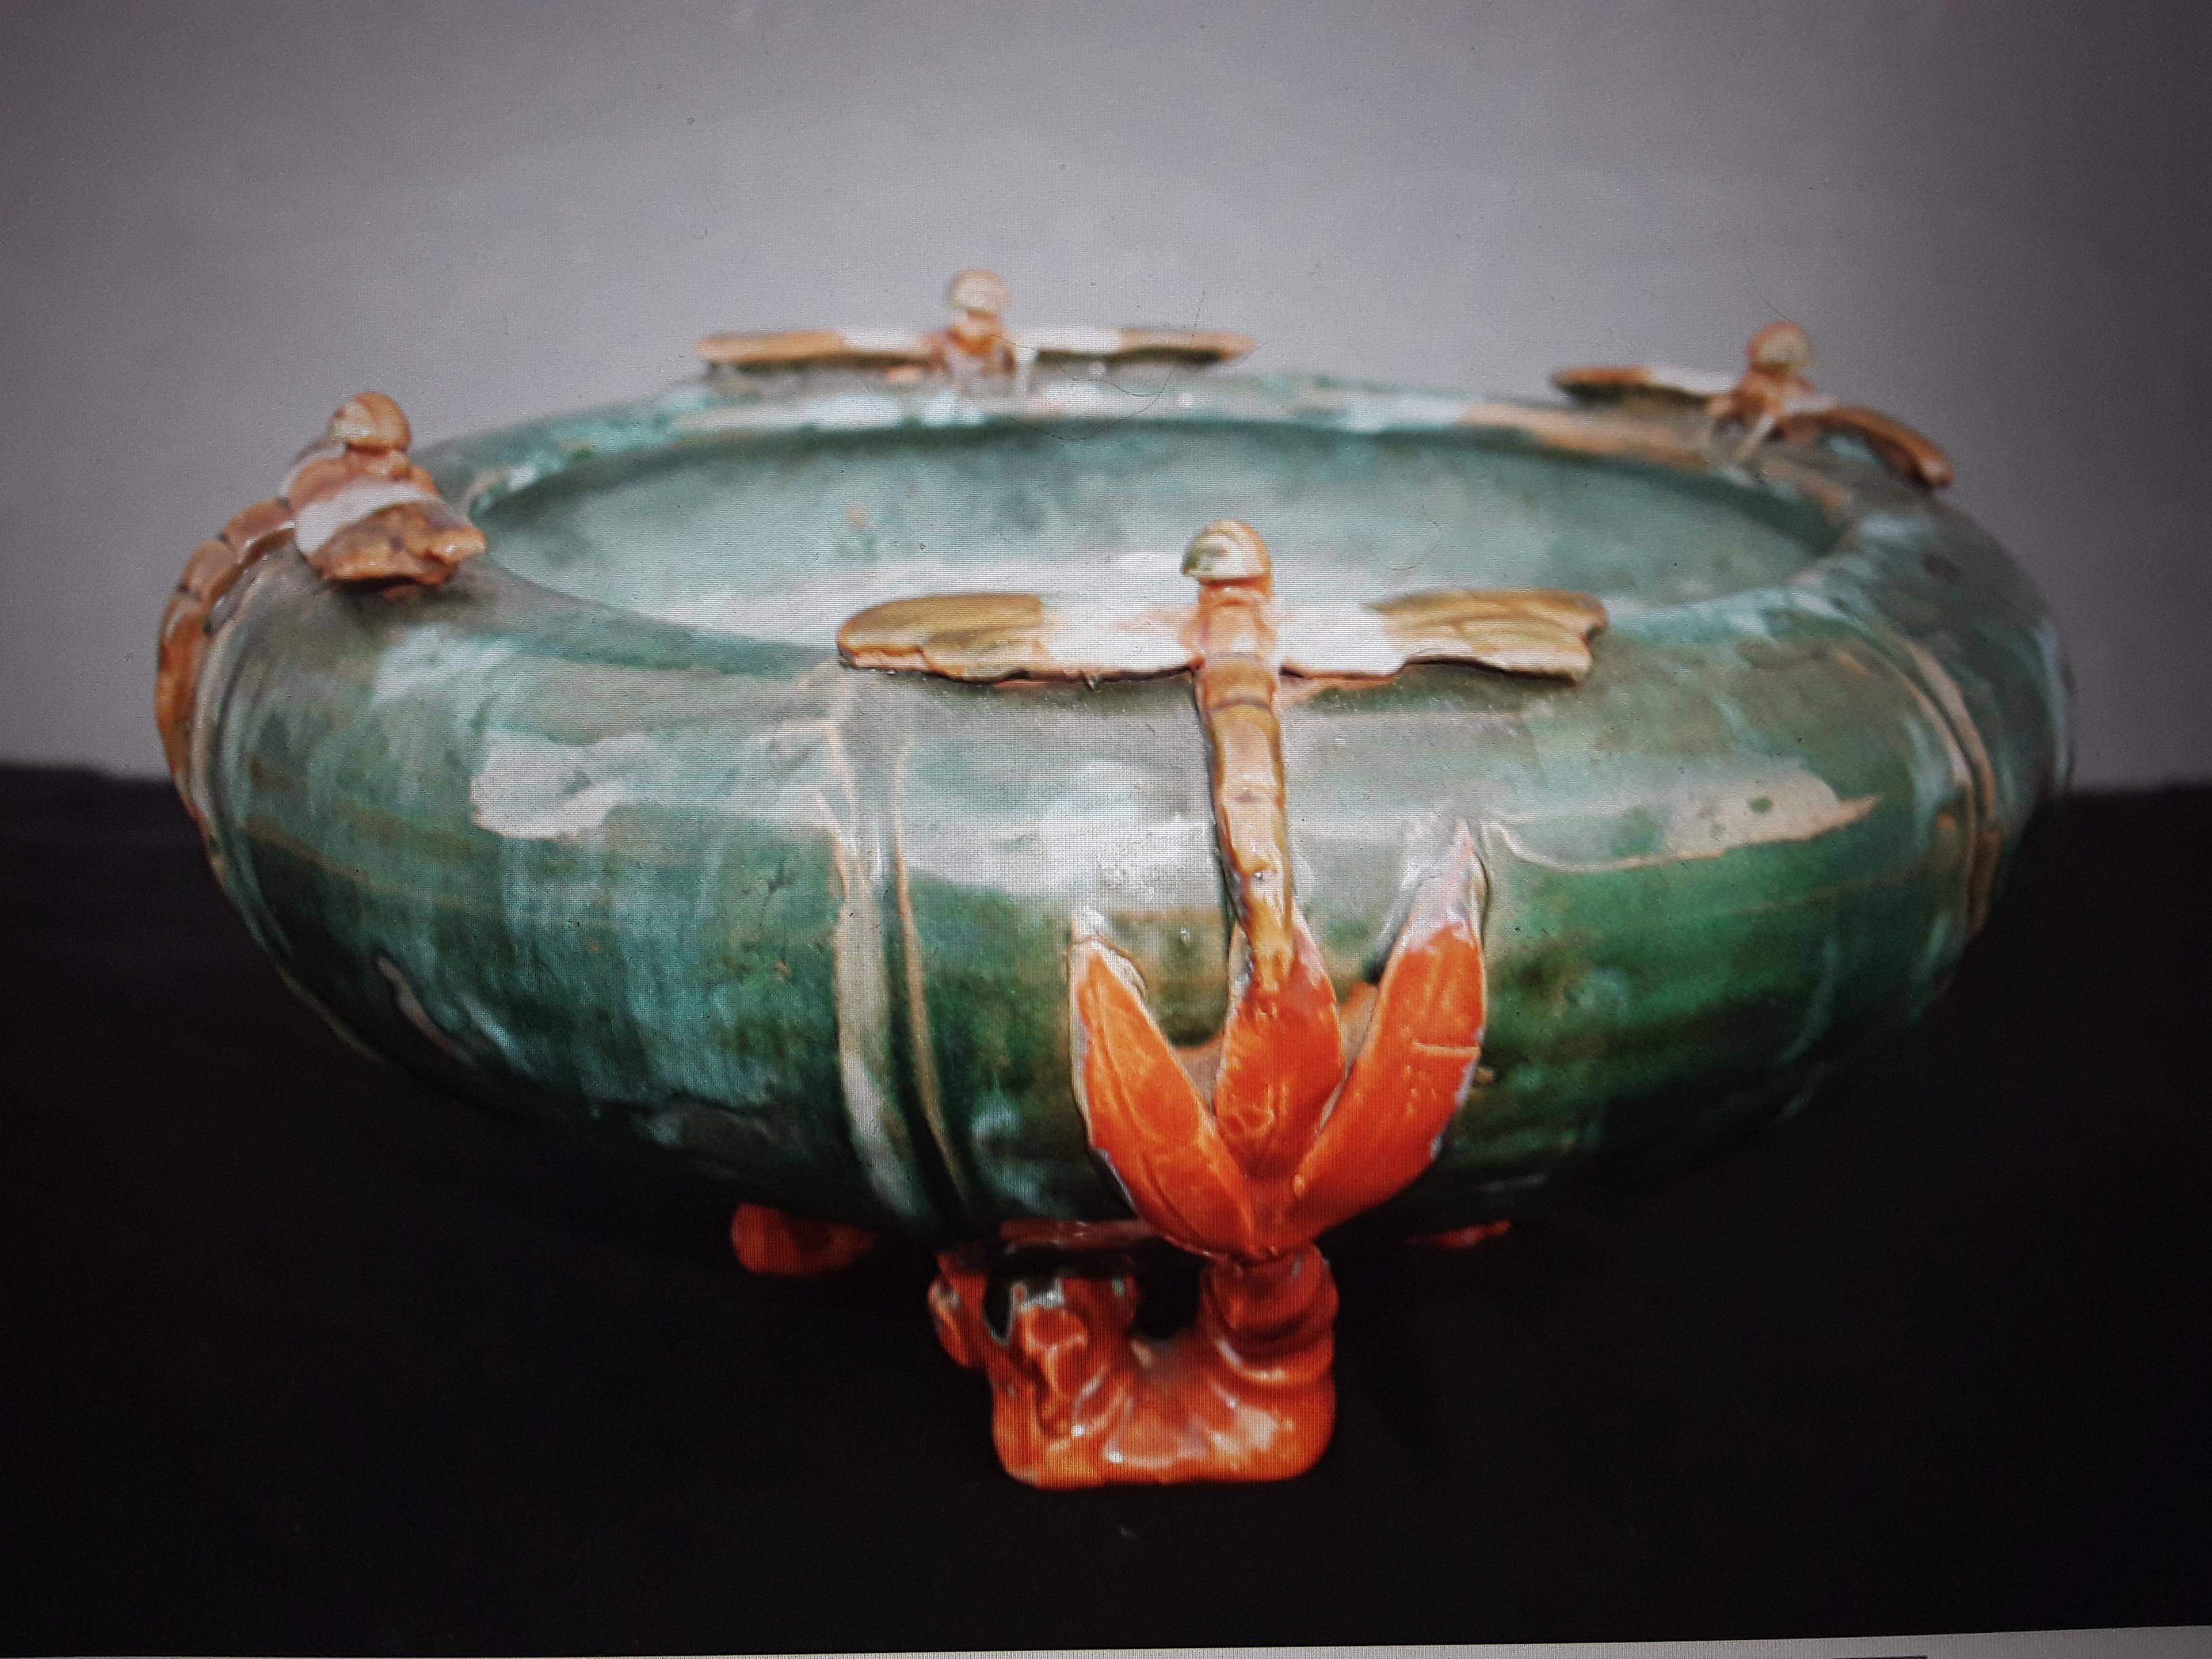 French Art Nouveau Glazed Terracotta Decorative Bowl. There are applied Dragonflies. Beautiful bowl!